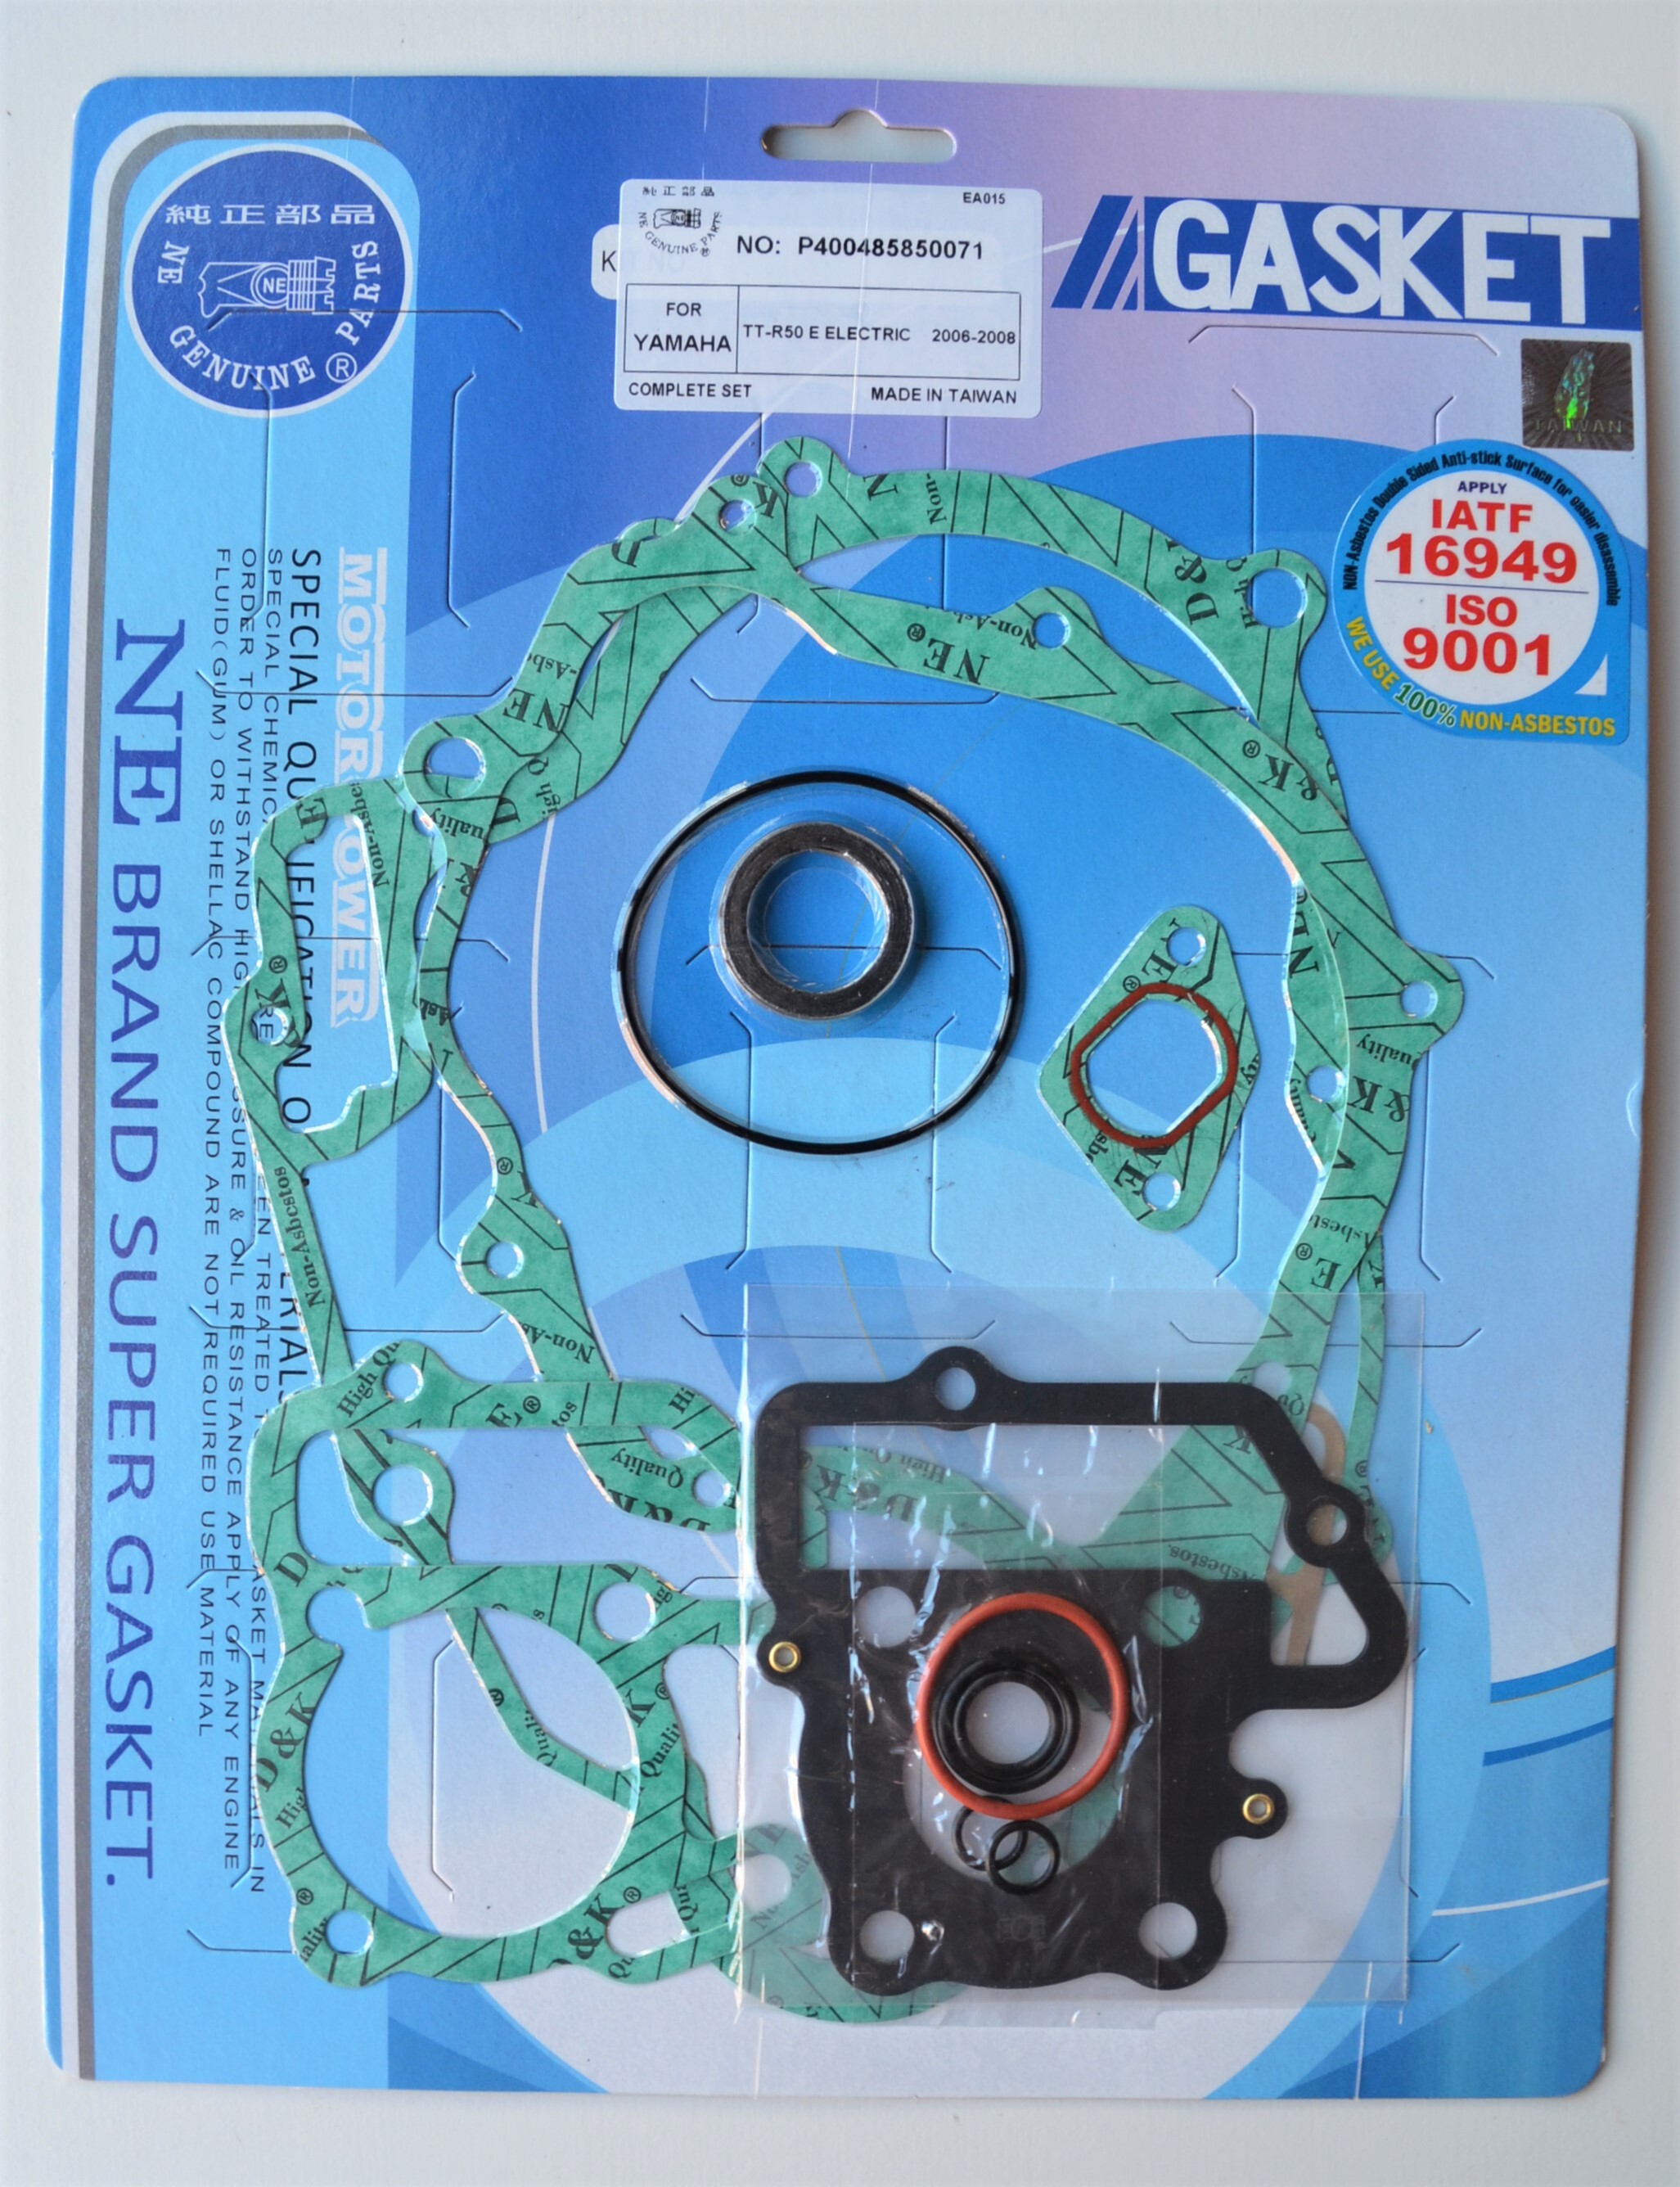 COMPLETE GASKET KIT FOR YAMAHA TT - R50 E ELECTRIC 2006 - 2008